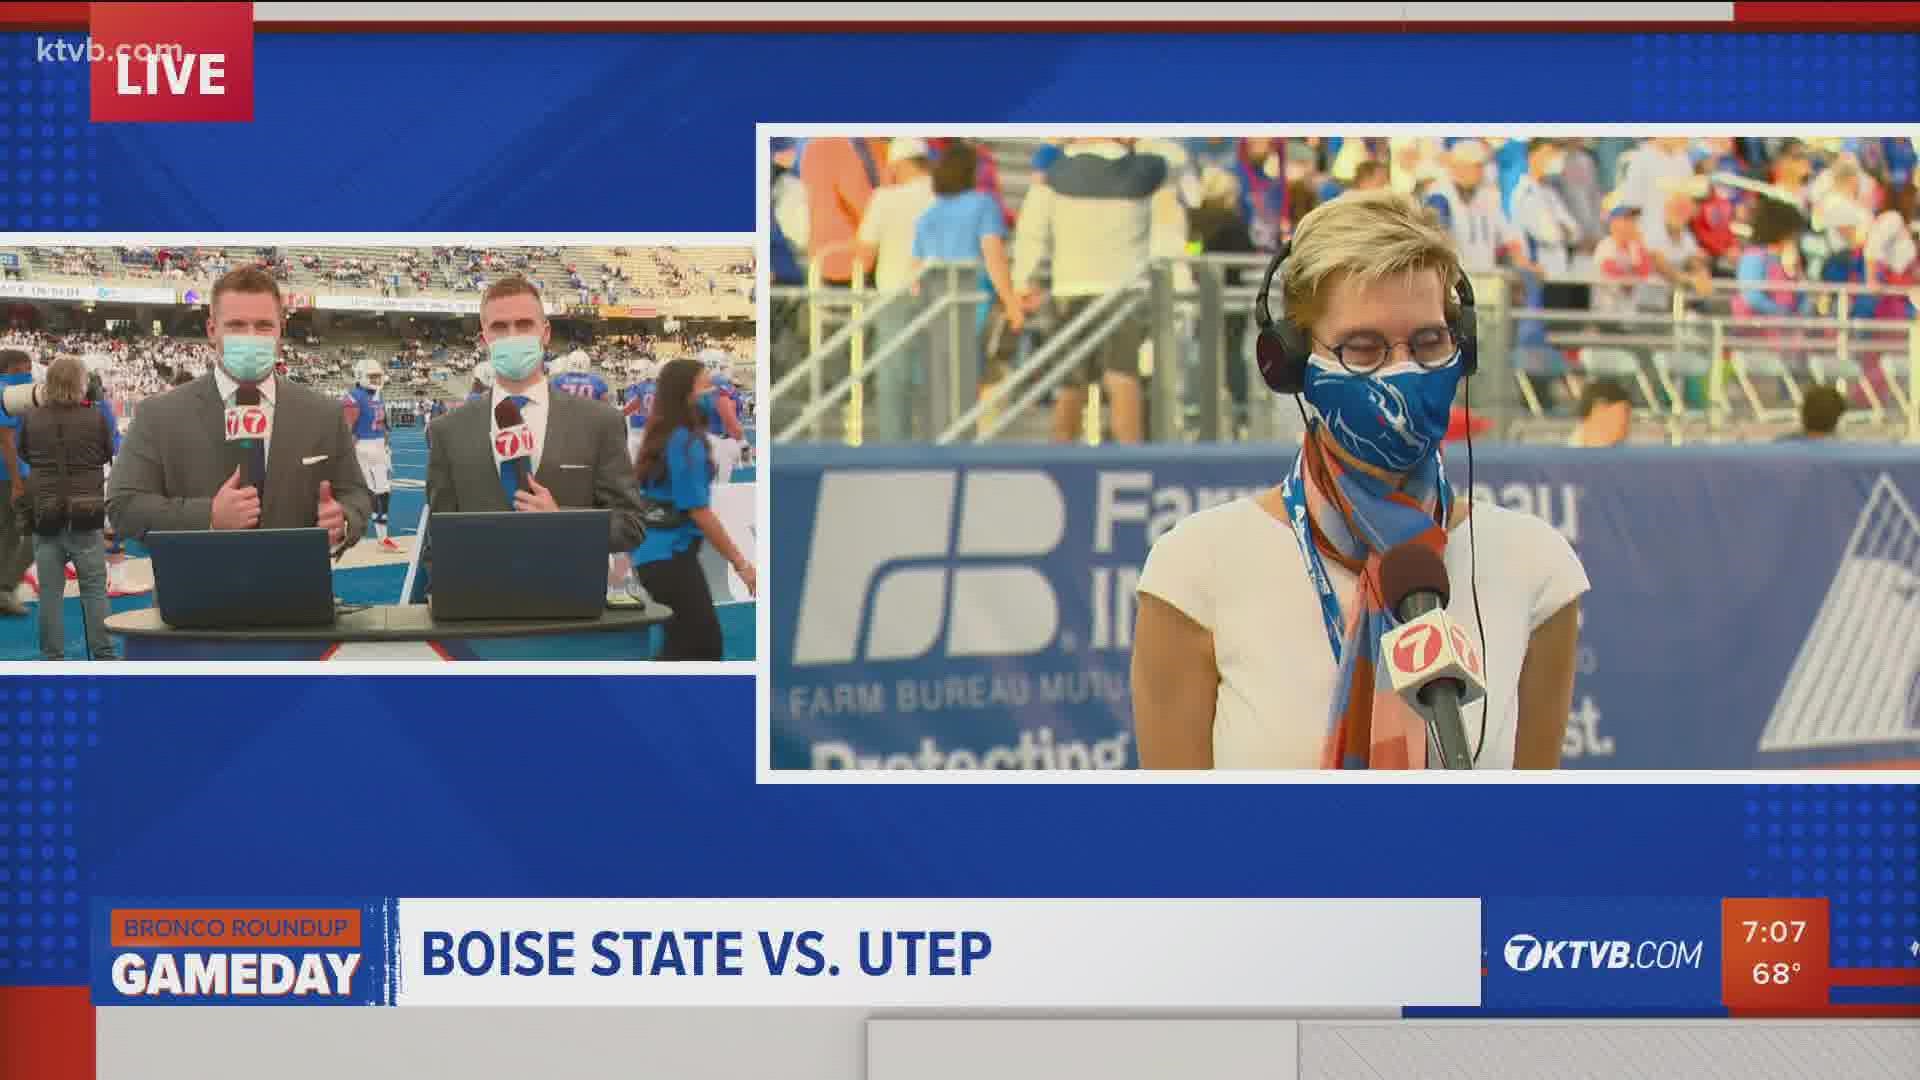 After a rough 2020 season due to the COVID-19 pandemic, Dr. Tromp is excited for Boise State football to return.